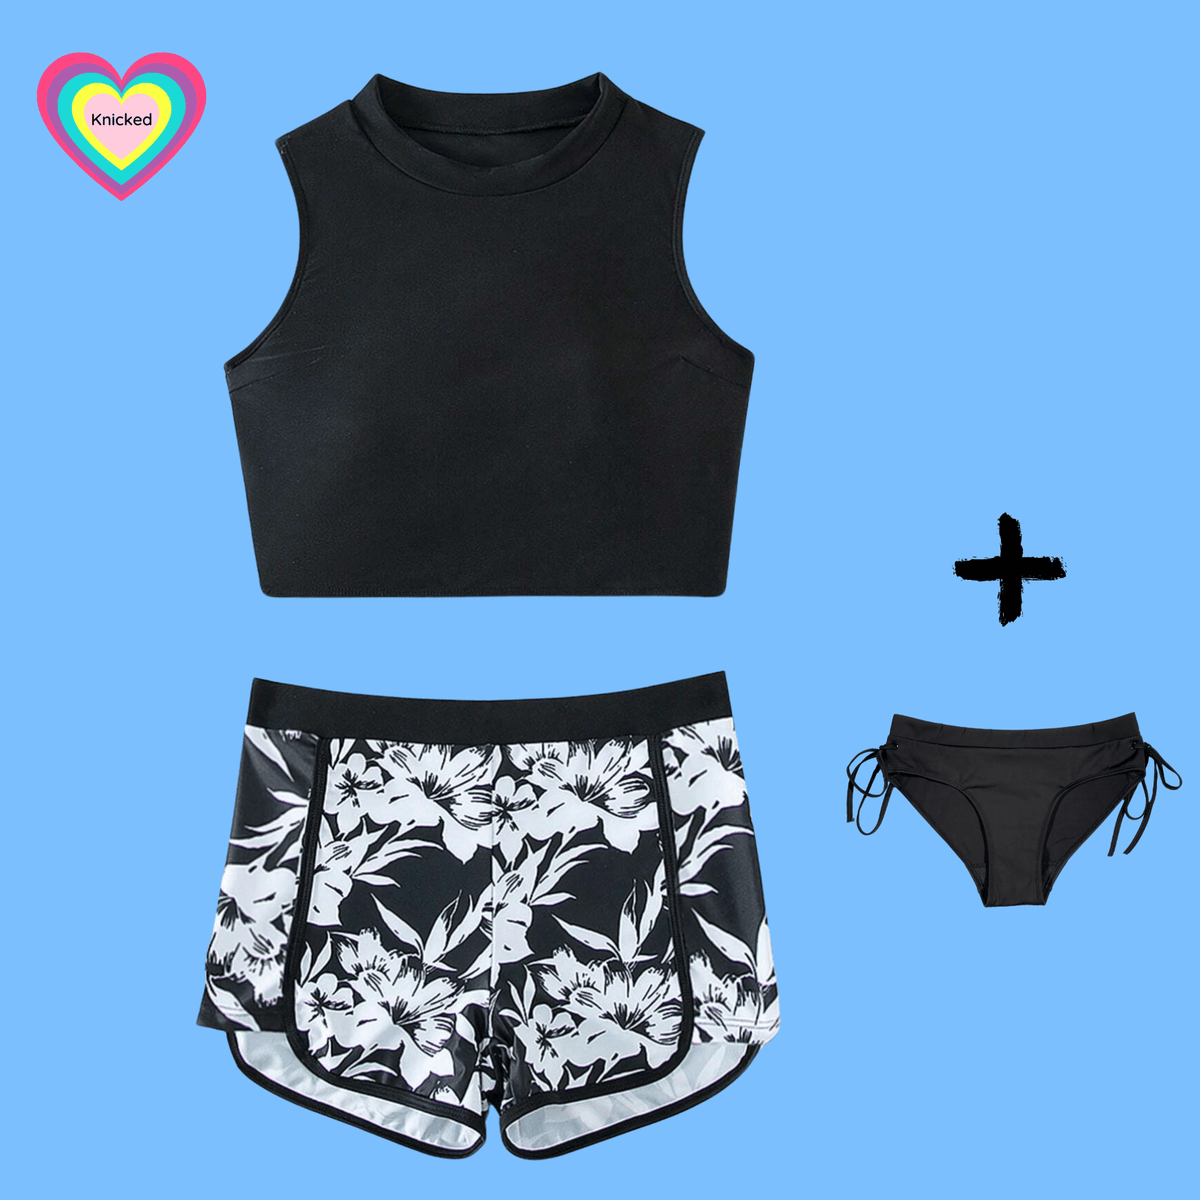 Knicked Black/white 3 piece floral period swim set - bathers - swimmers